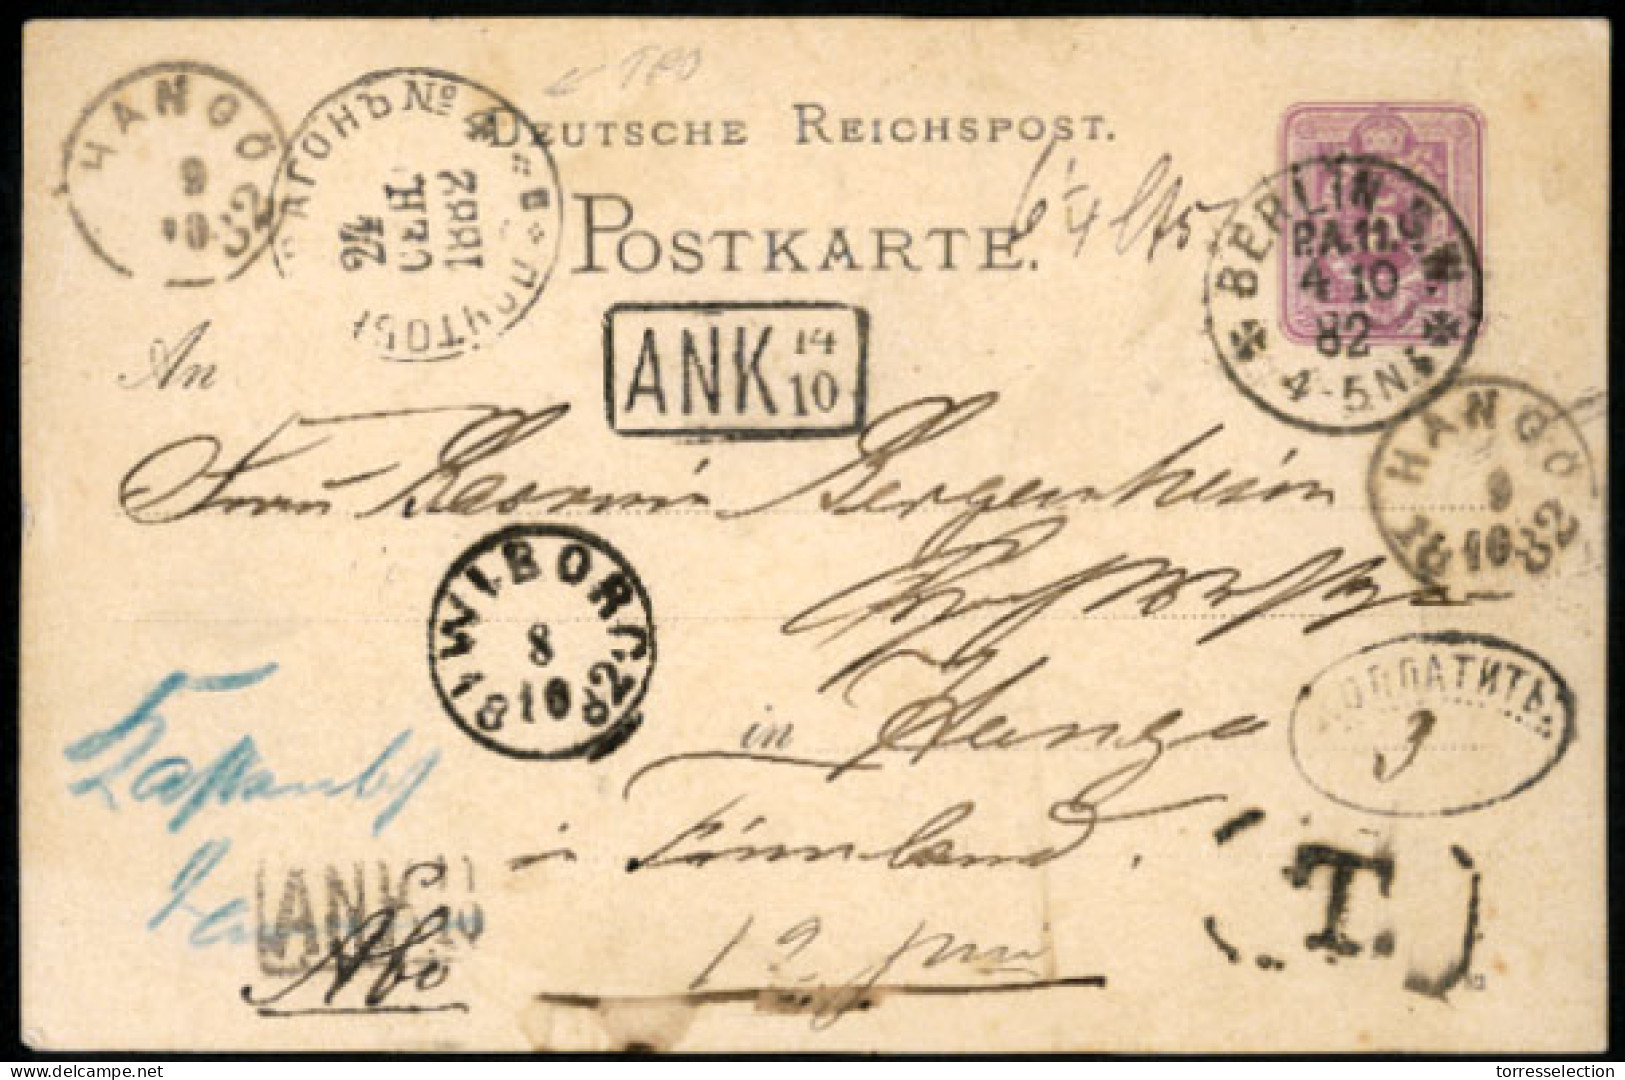 FINLAND. 1882. FINLAND - RUSSIA - GERMANY. 5pf. Postal Stationery Card To HANGO, Finland, Cancelled BERLIN, S.W.date Sta - Other & Unclassified